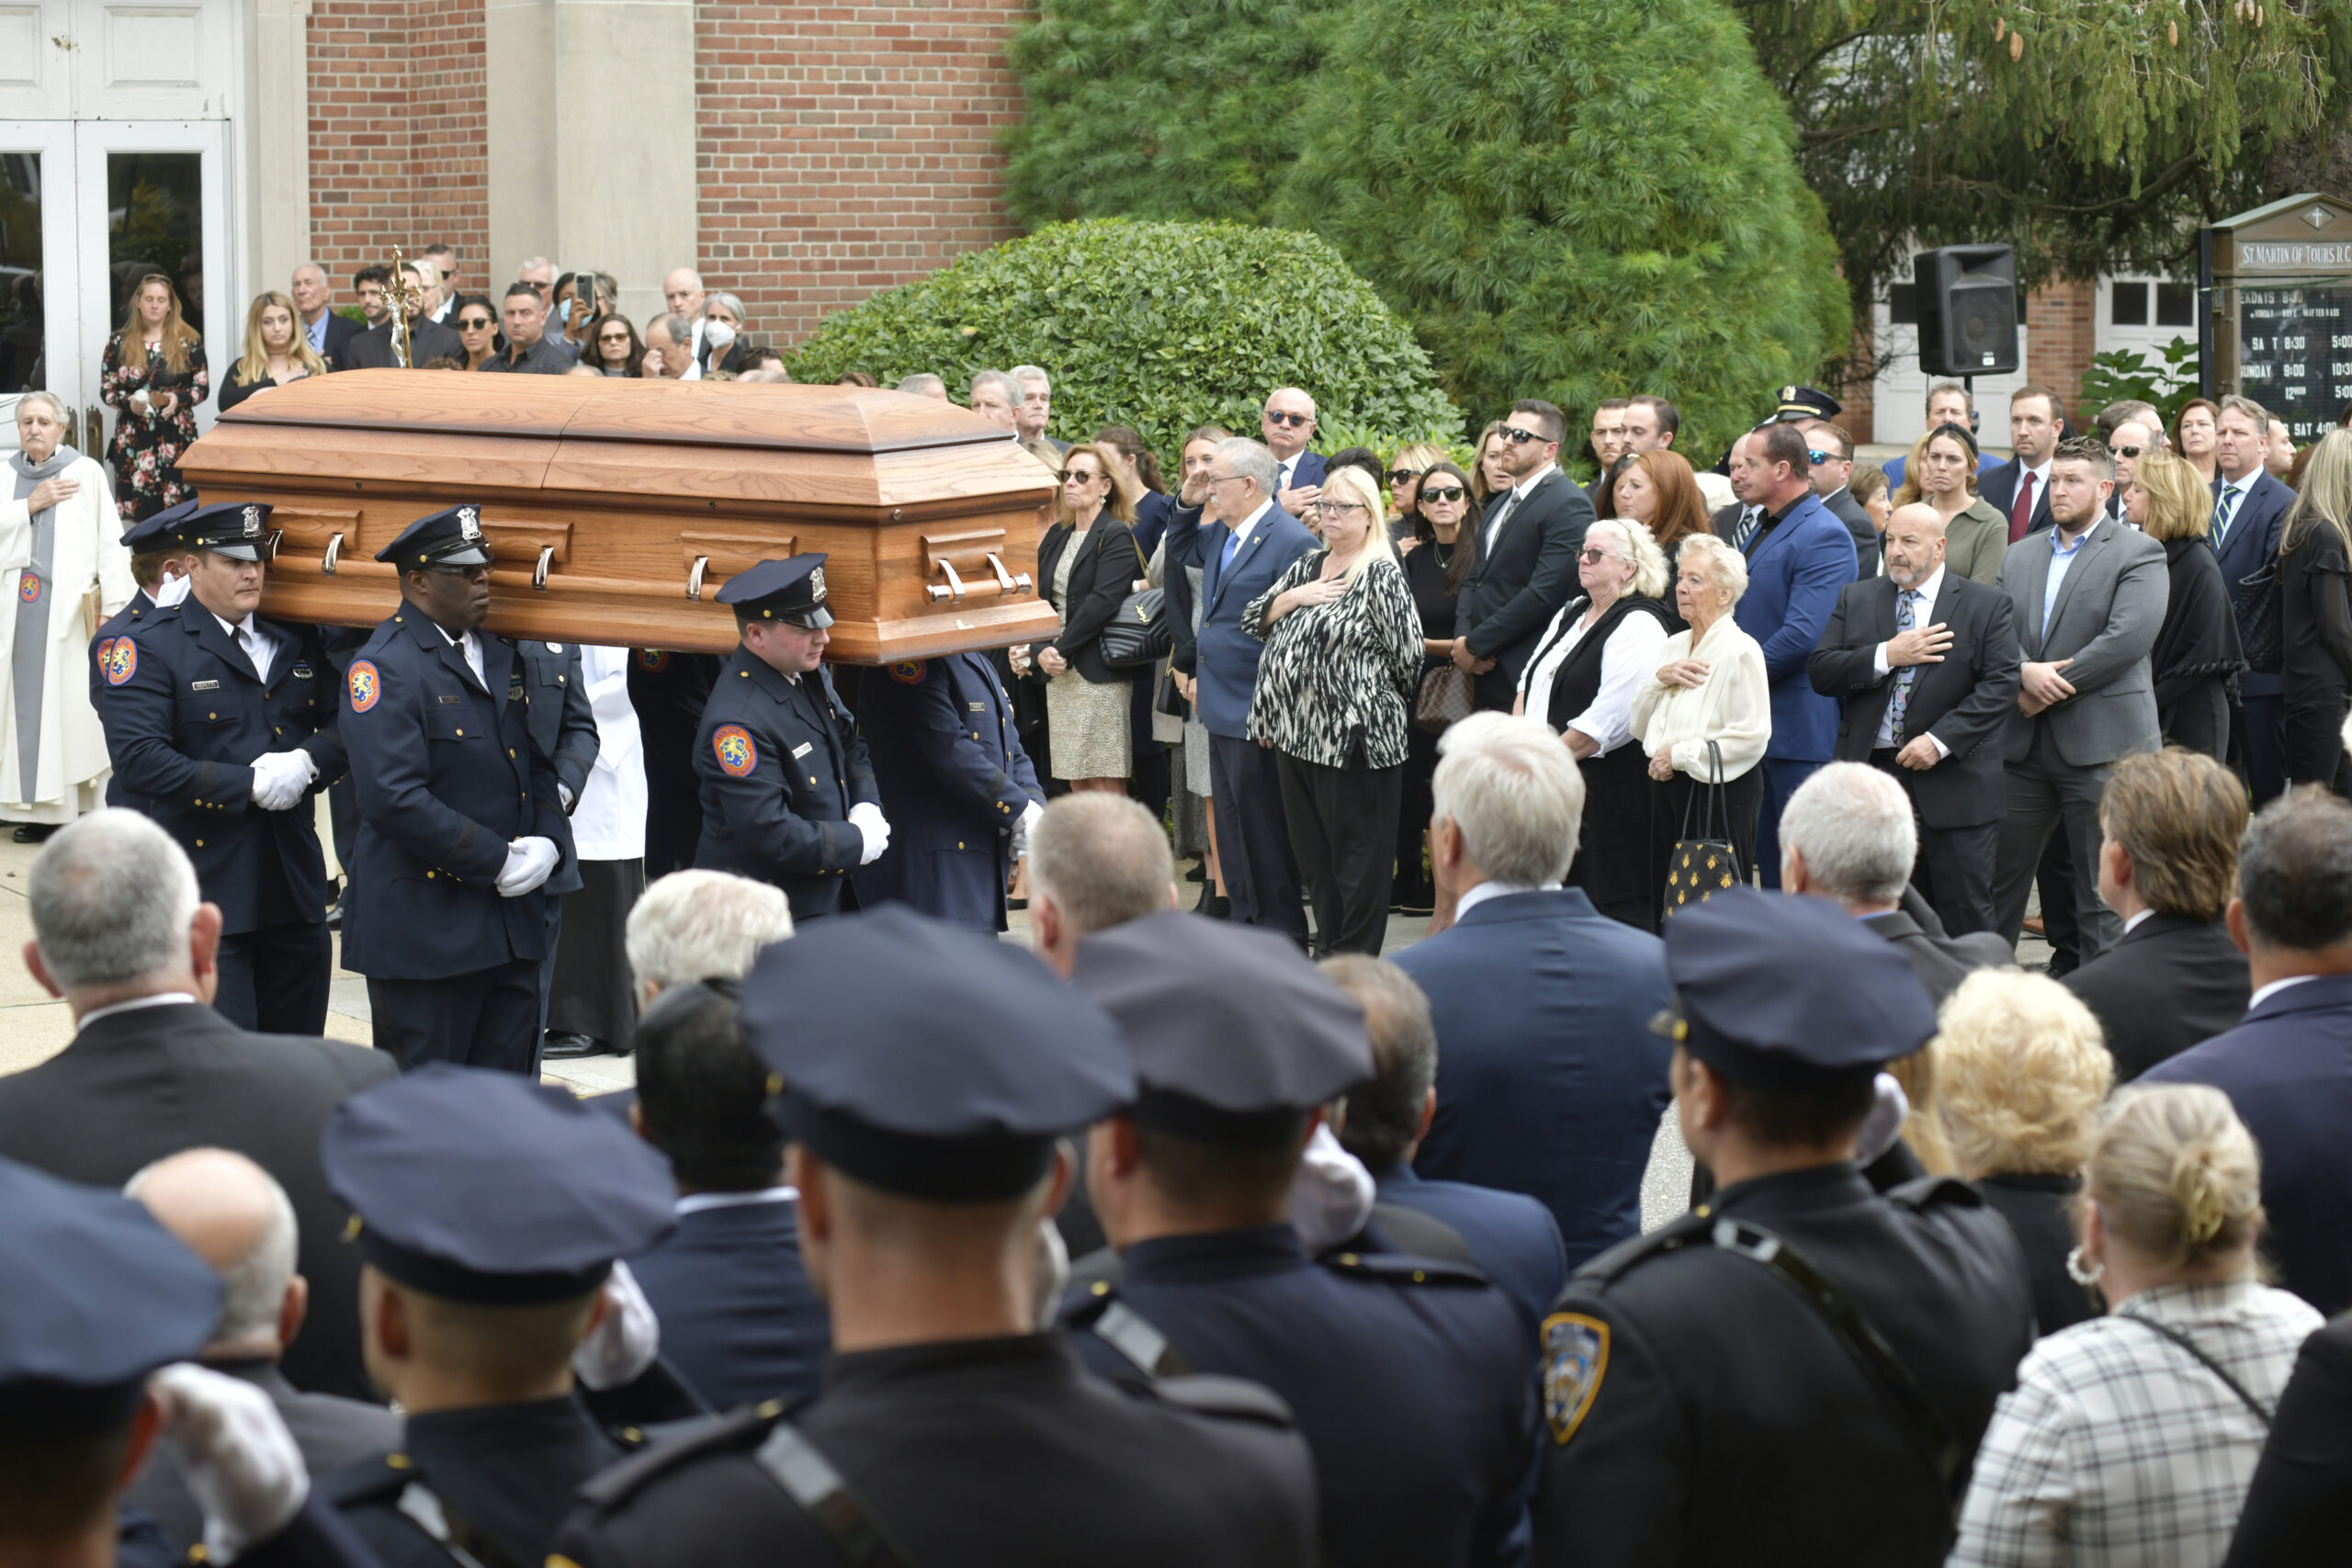 Pallbearers carry the casket of Southampton Police Chief Steven Skrynecki from St. Martin of Tours Church in Amityville on October 13.